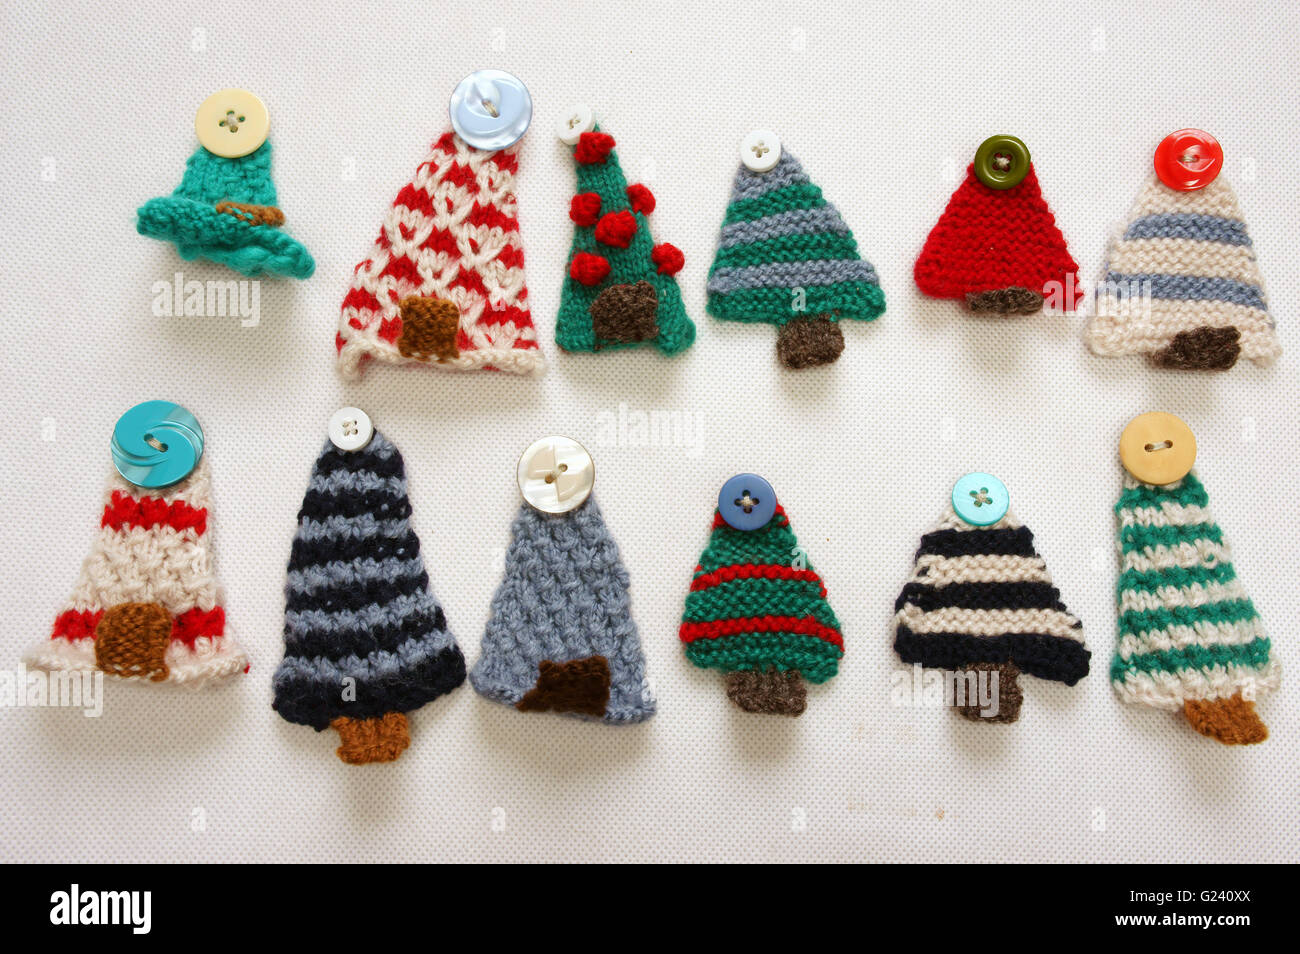 Handmade product for winter holiday, group of knitting ornament as leaf, acorn, clock, mushroom, strawberry, pine tree, hat Stock Photo